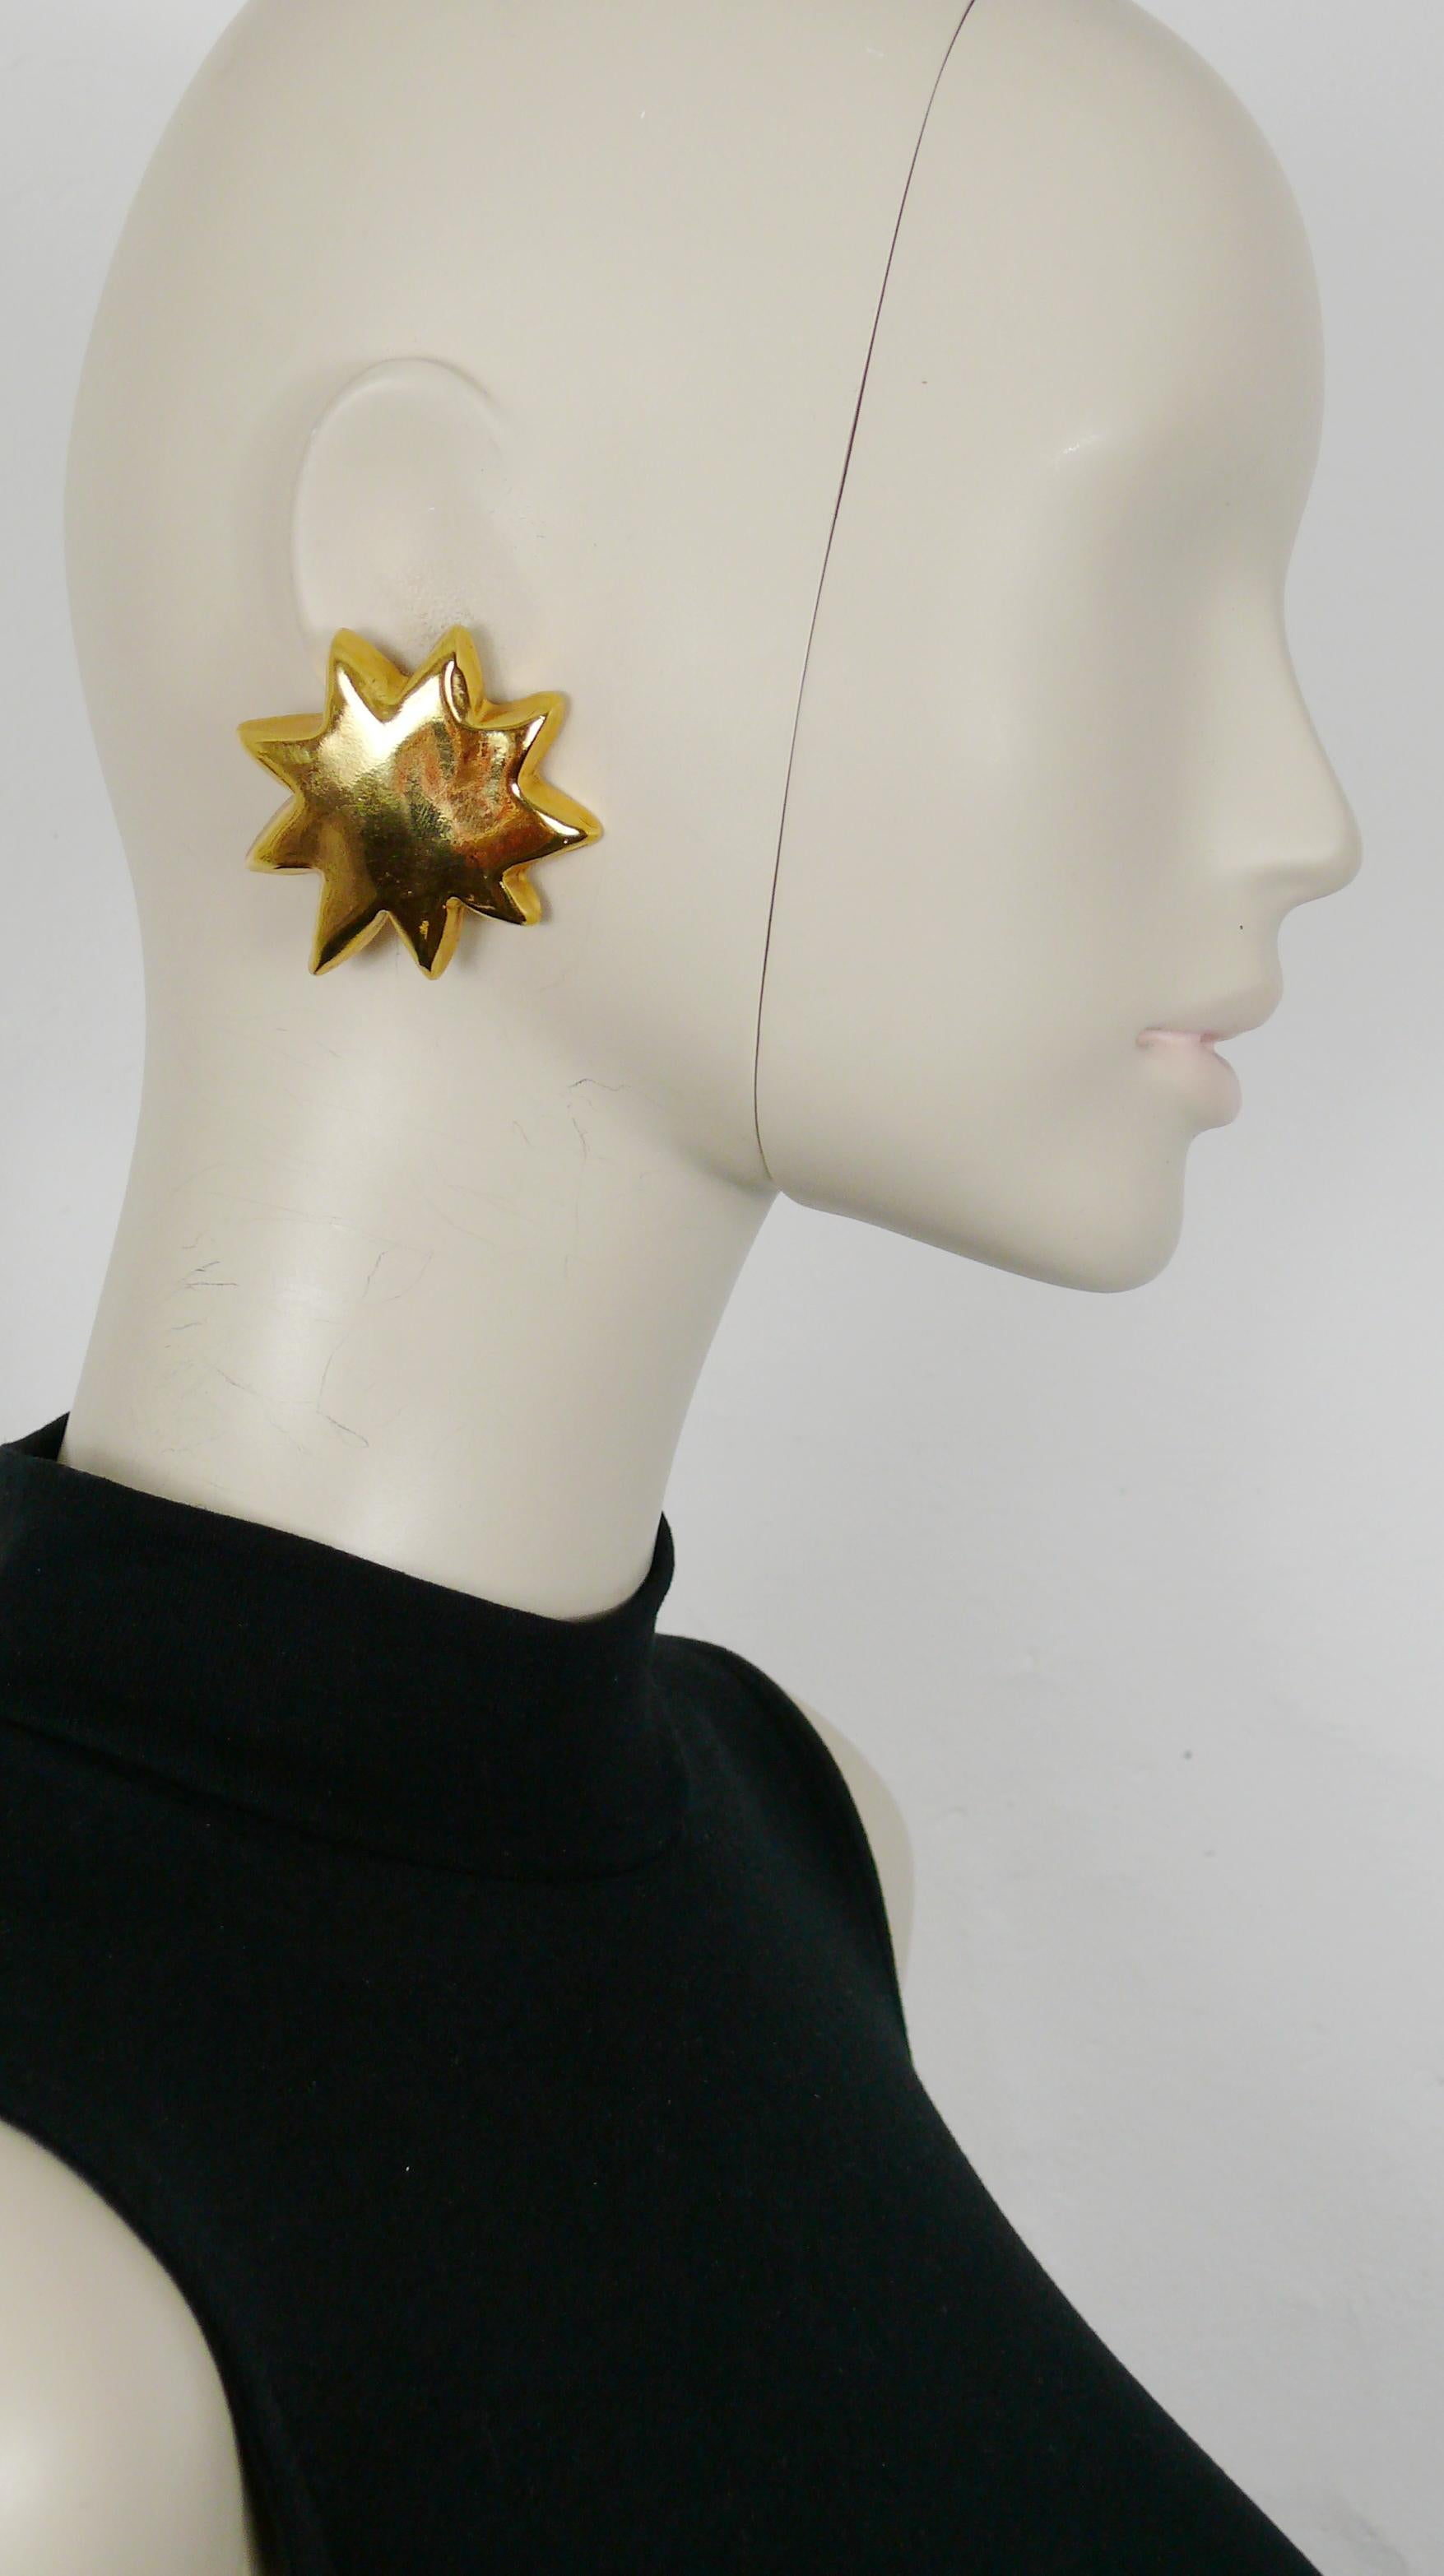 CHRISTIAN LACROIX vintage gold toned resin iconic starburst clip-on earrings.

Marked CHRISTIAN LACROIX CL Made in France.
Only on one earring (the other oval signature stamp has fallen down).

Indicative measurements : max. width approx. 5.1 cm